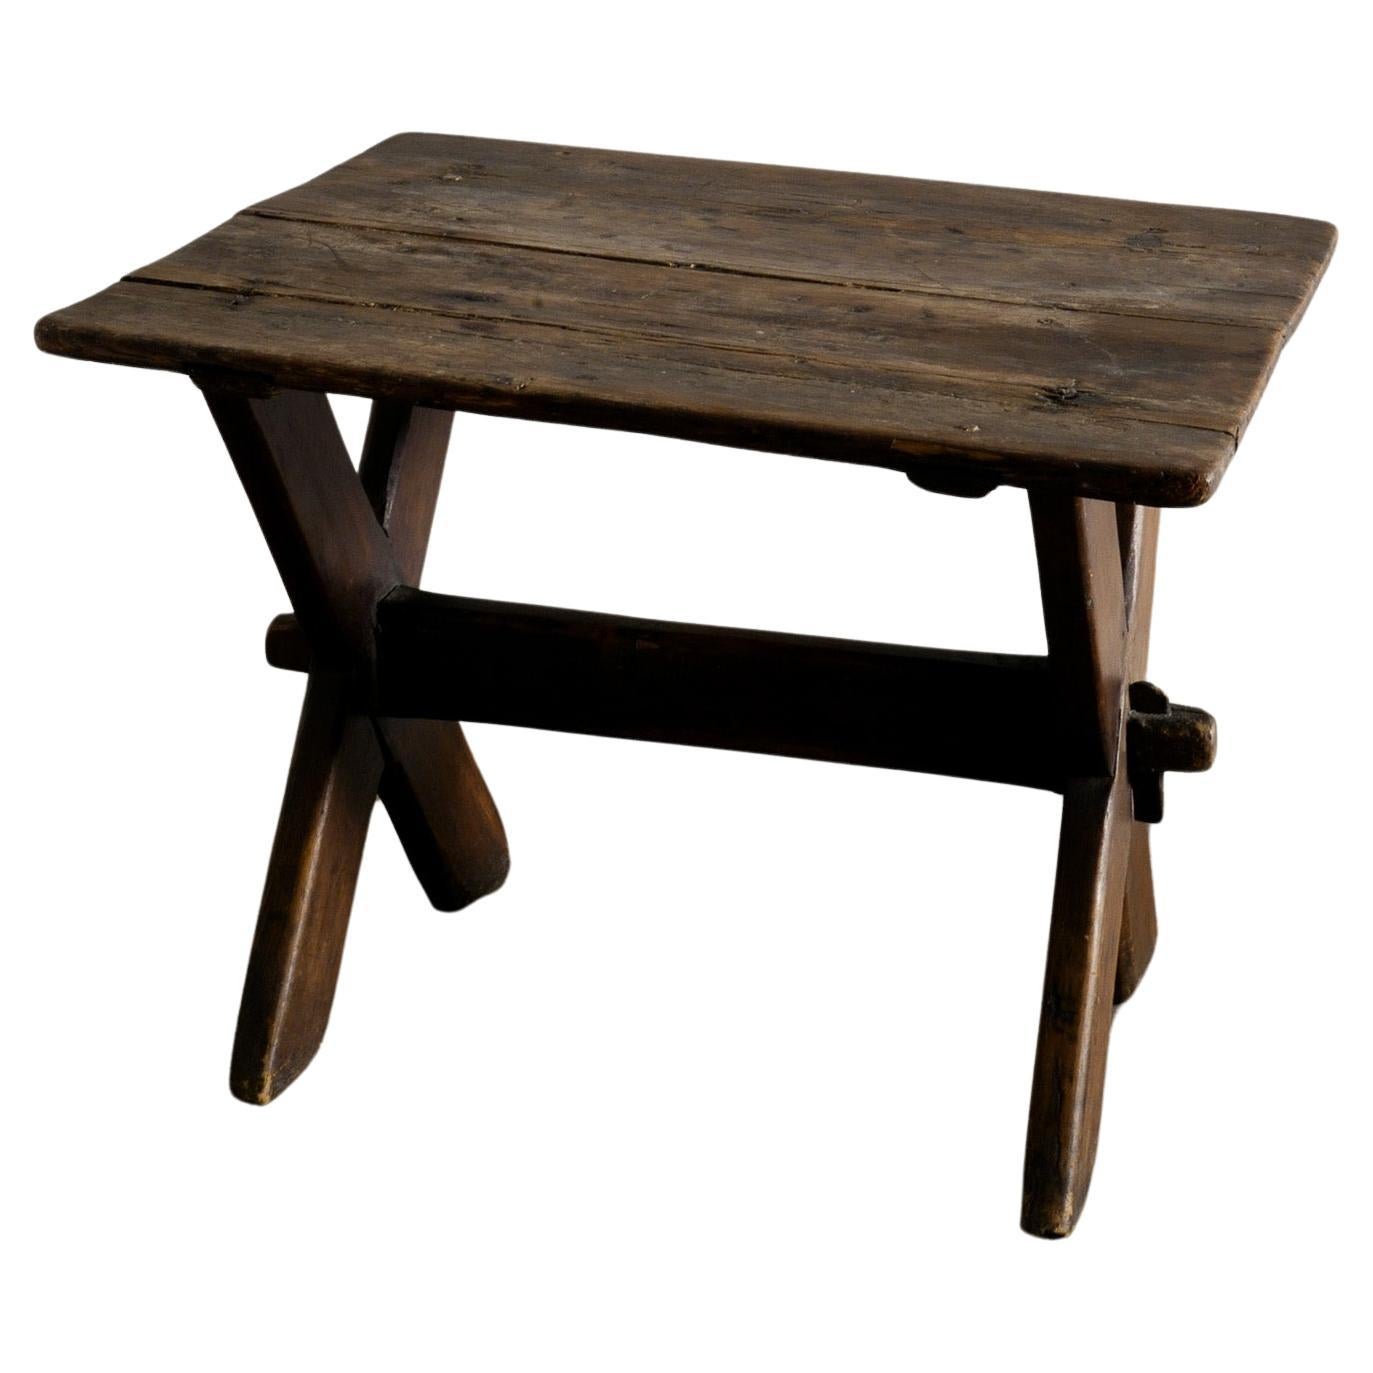 Swedish Primitive Side Coffee Table in Stained Pine Produced in the Late 1800s